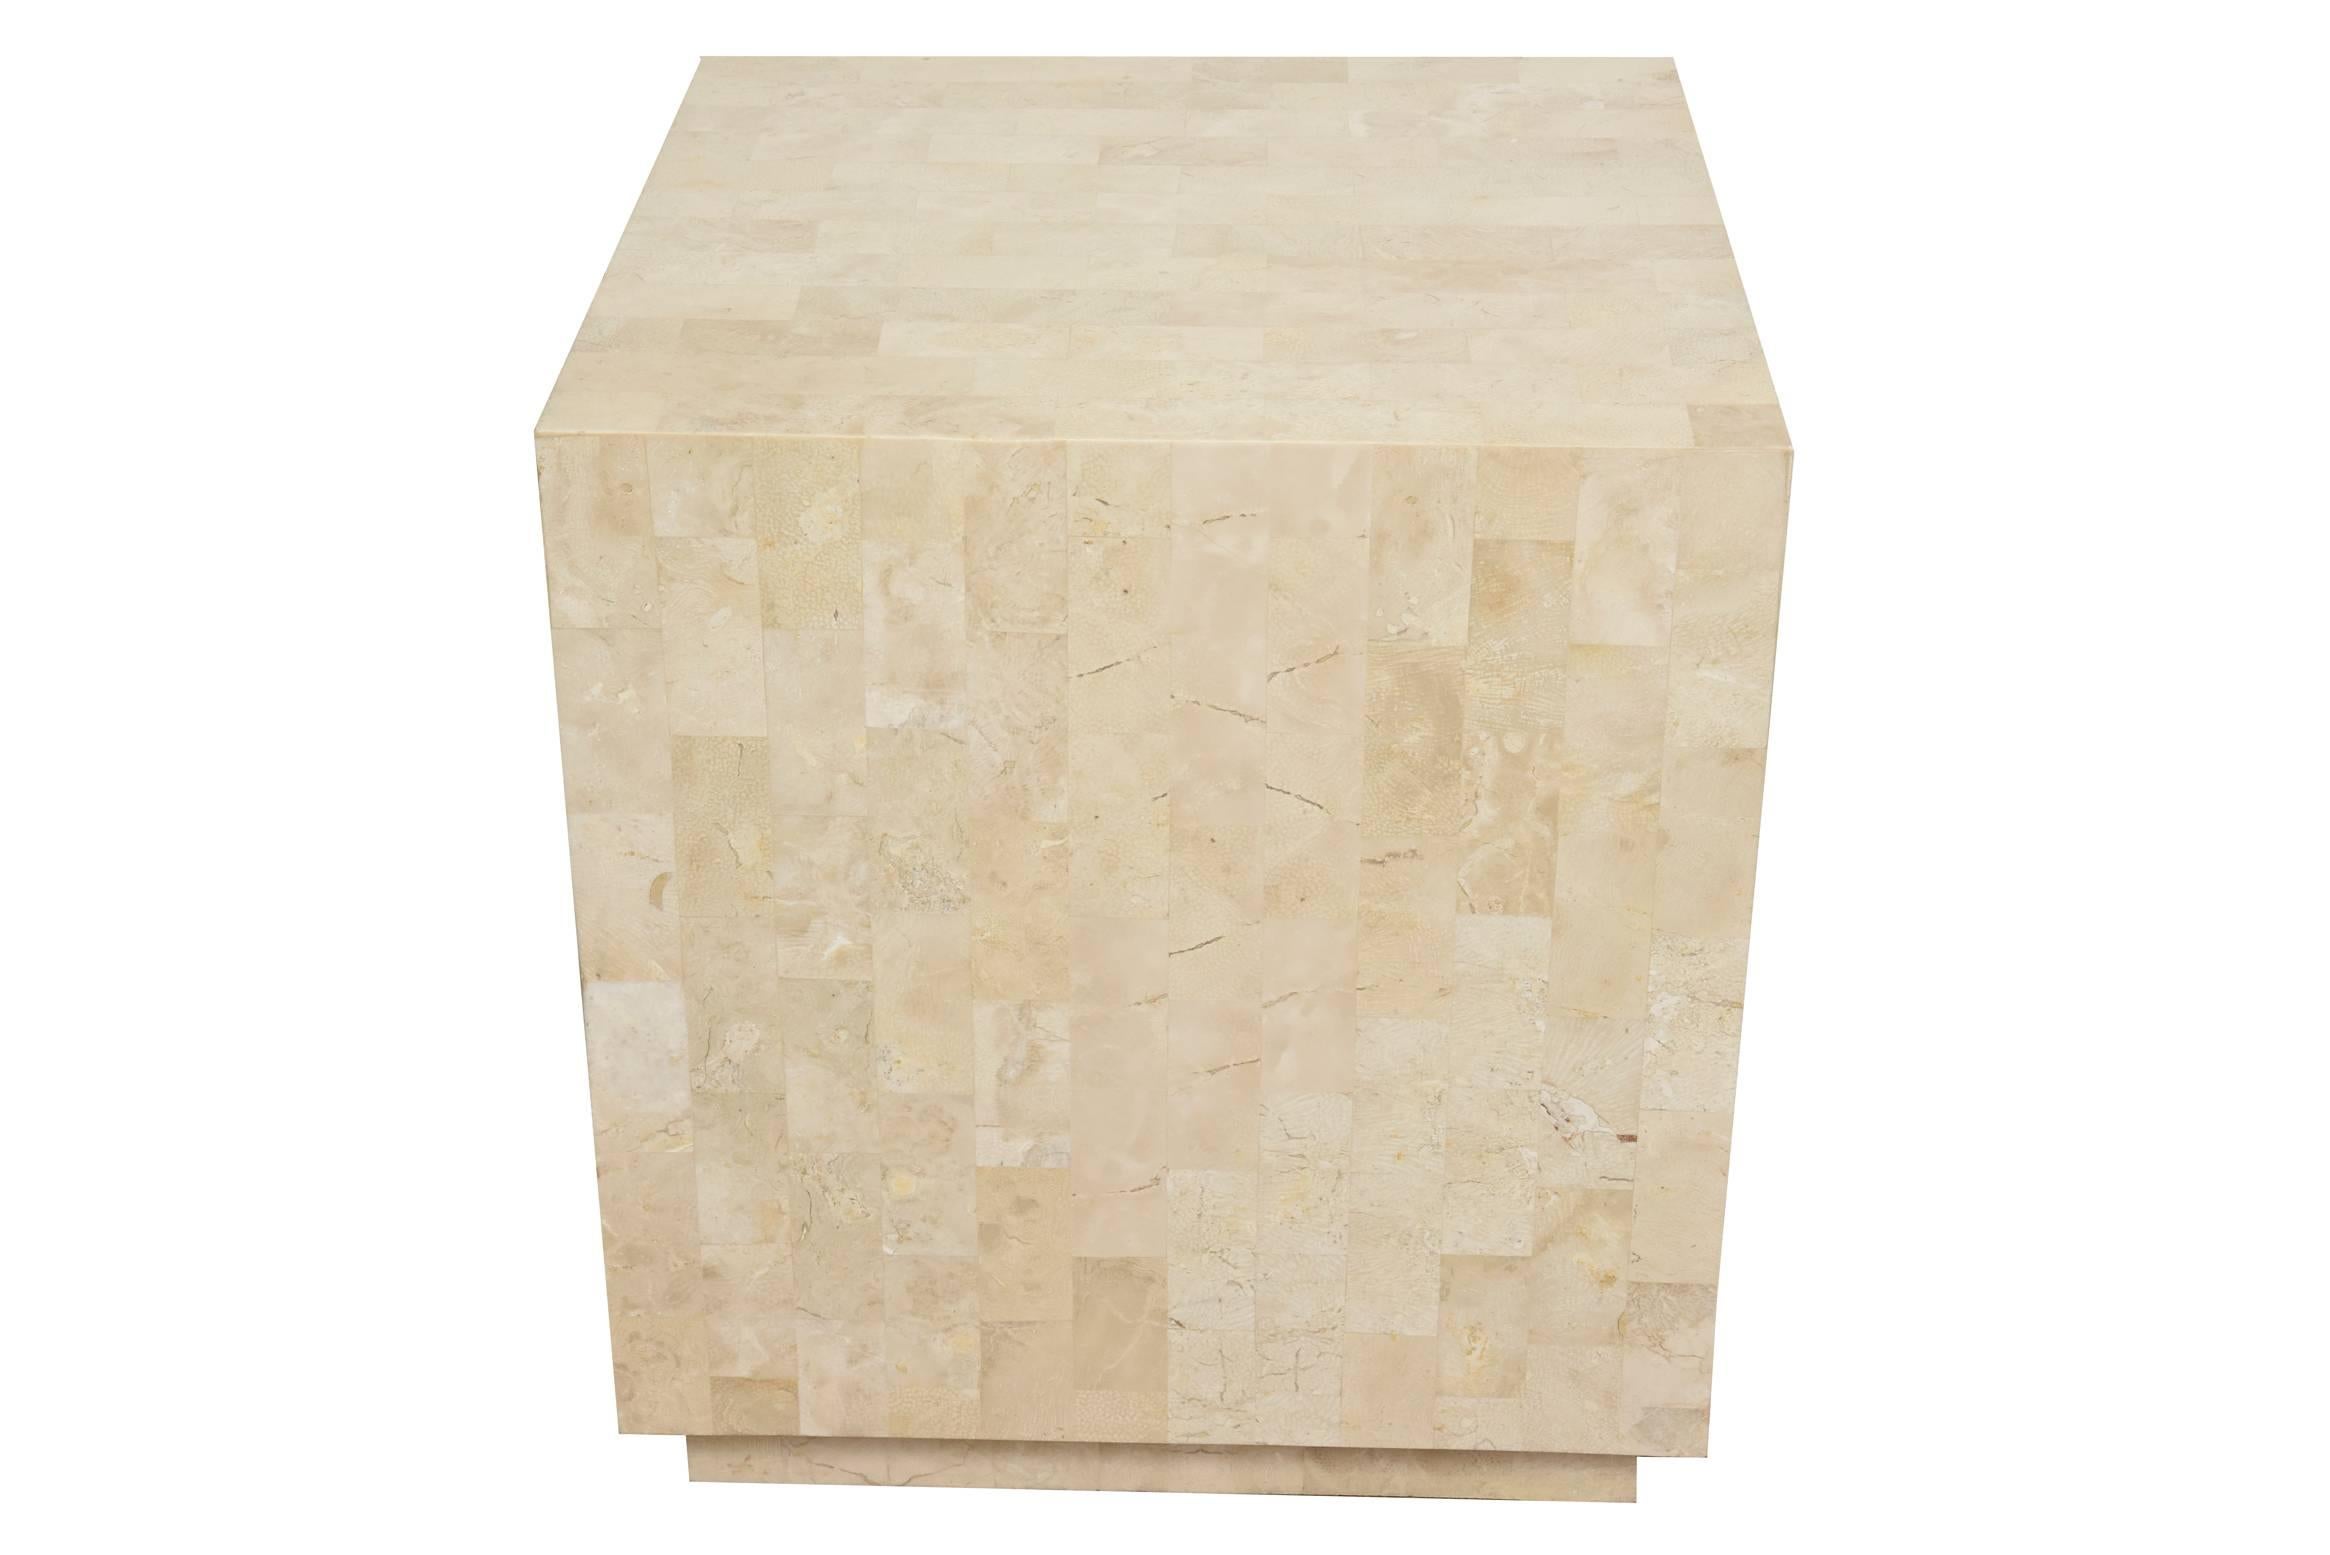 This versatile square vintage Maitland-Smith cube side table, table and or sculpture or art pedestal is tessellated stone with a recessed base. The variants of the stone color range from lighter beiges to medium beiges with off white elements in the